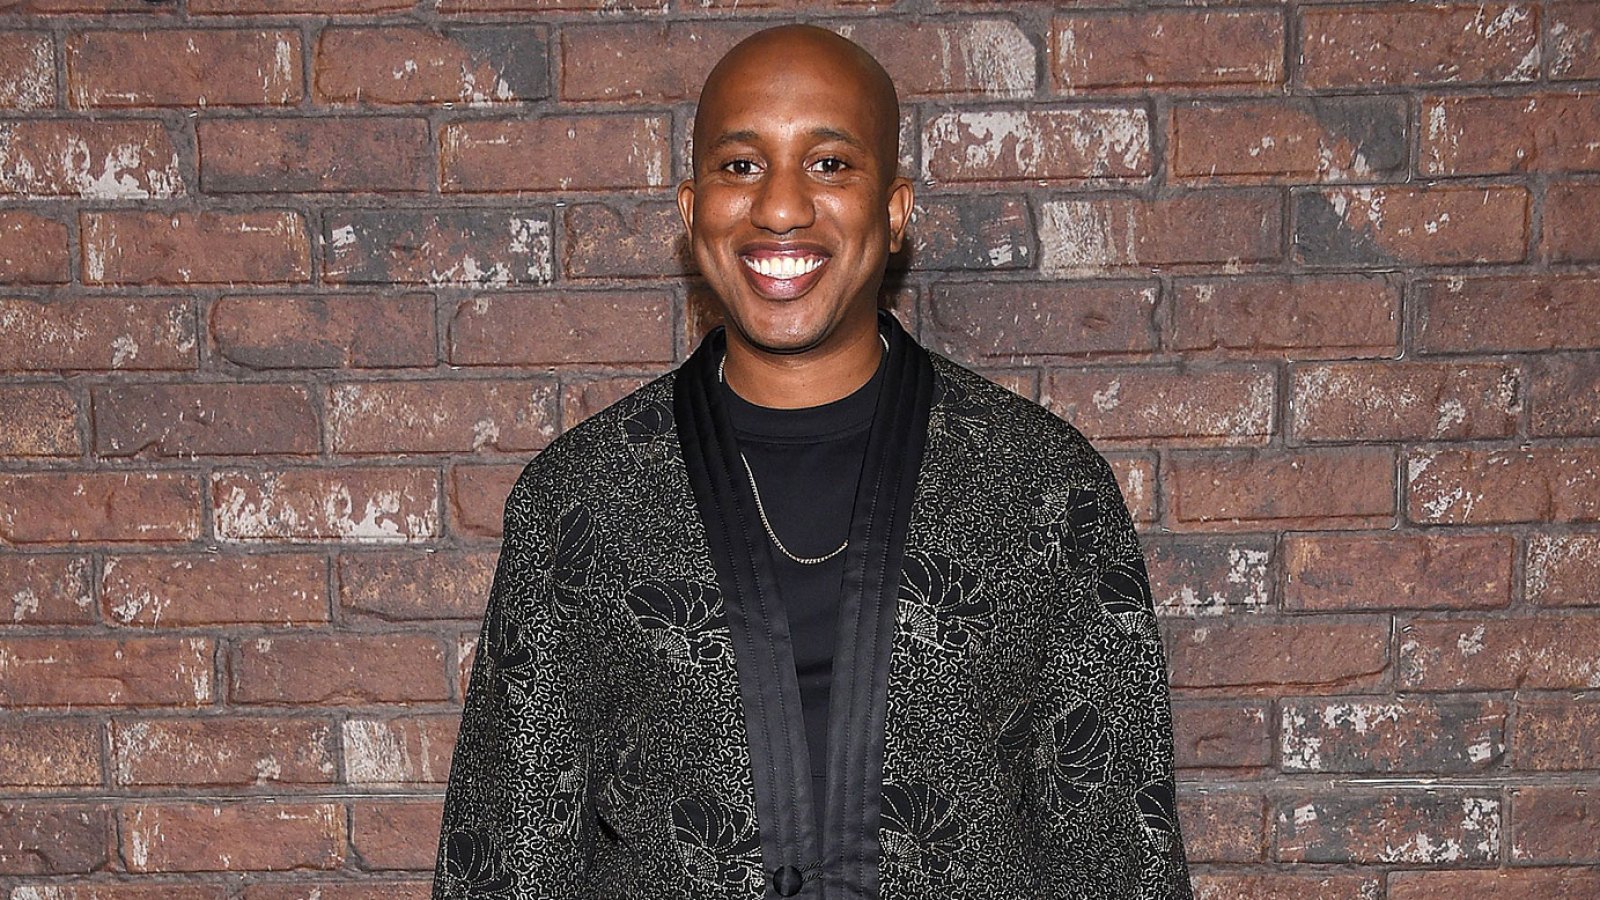 SNL Alum Chris Redd Allegedly Attacked Before NYC Comedy Show